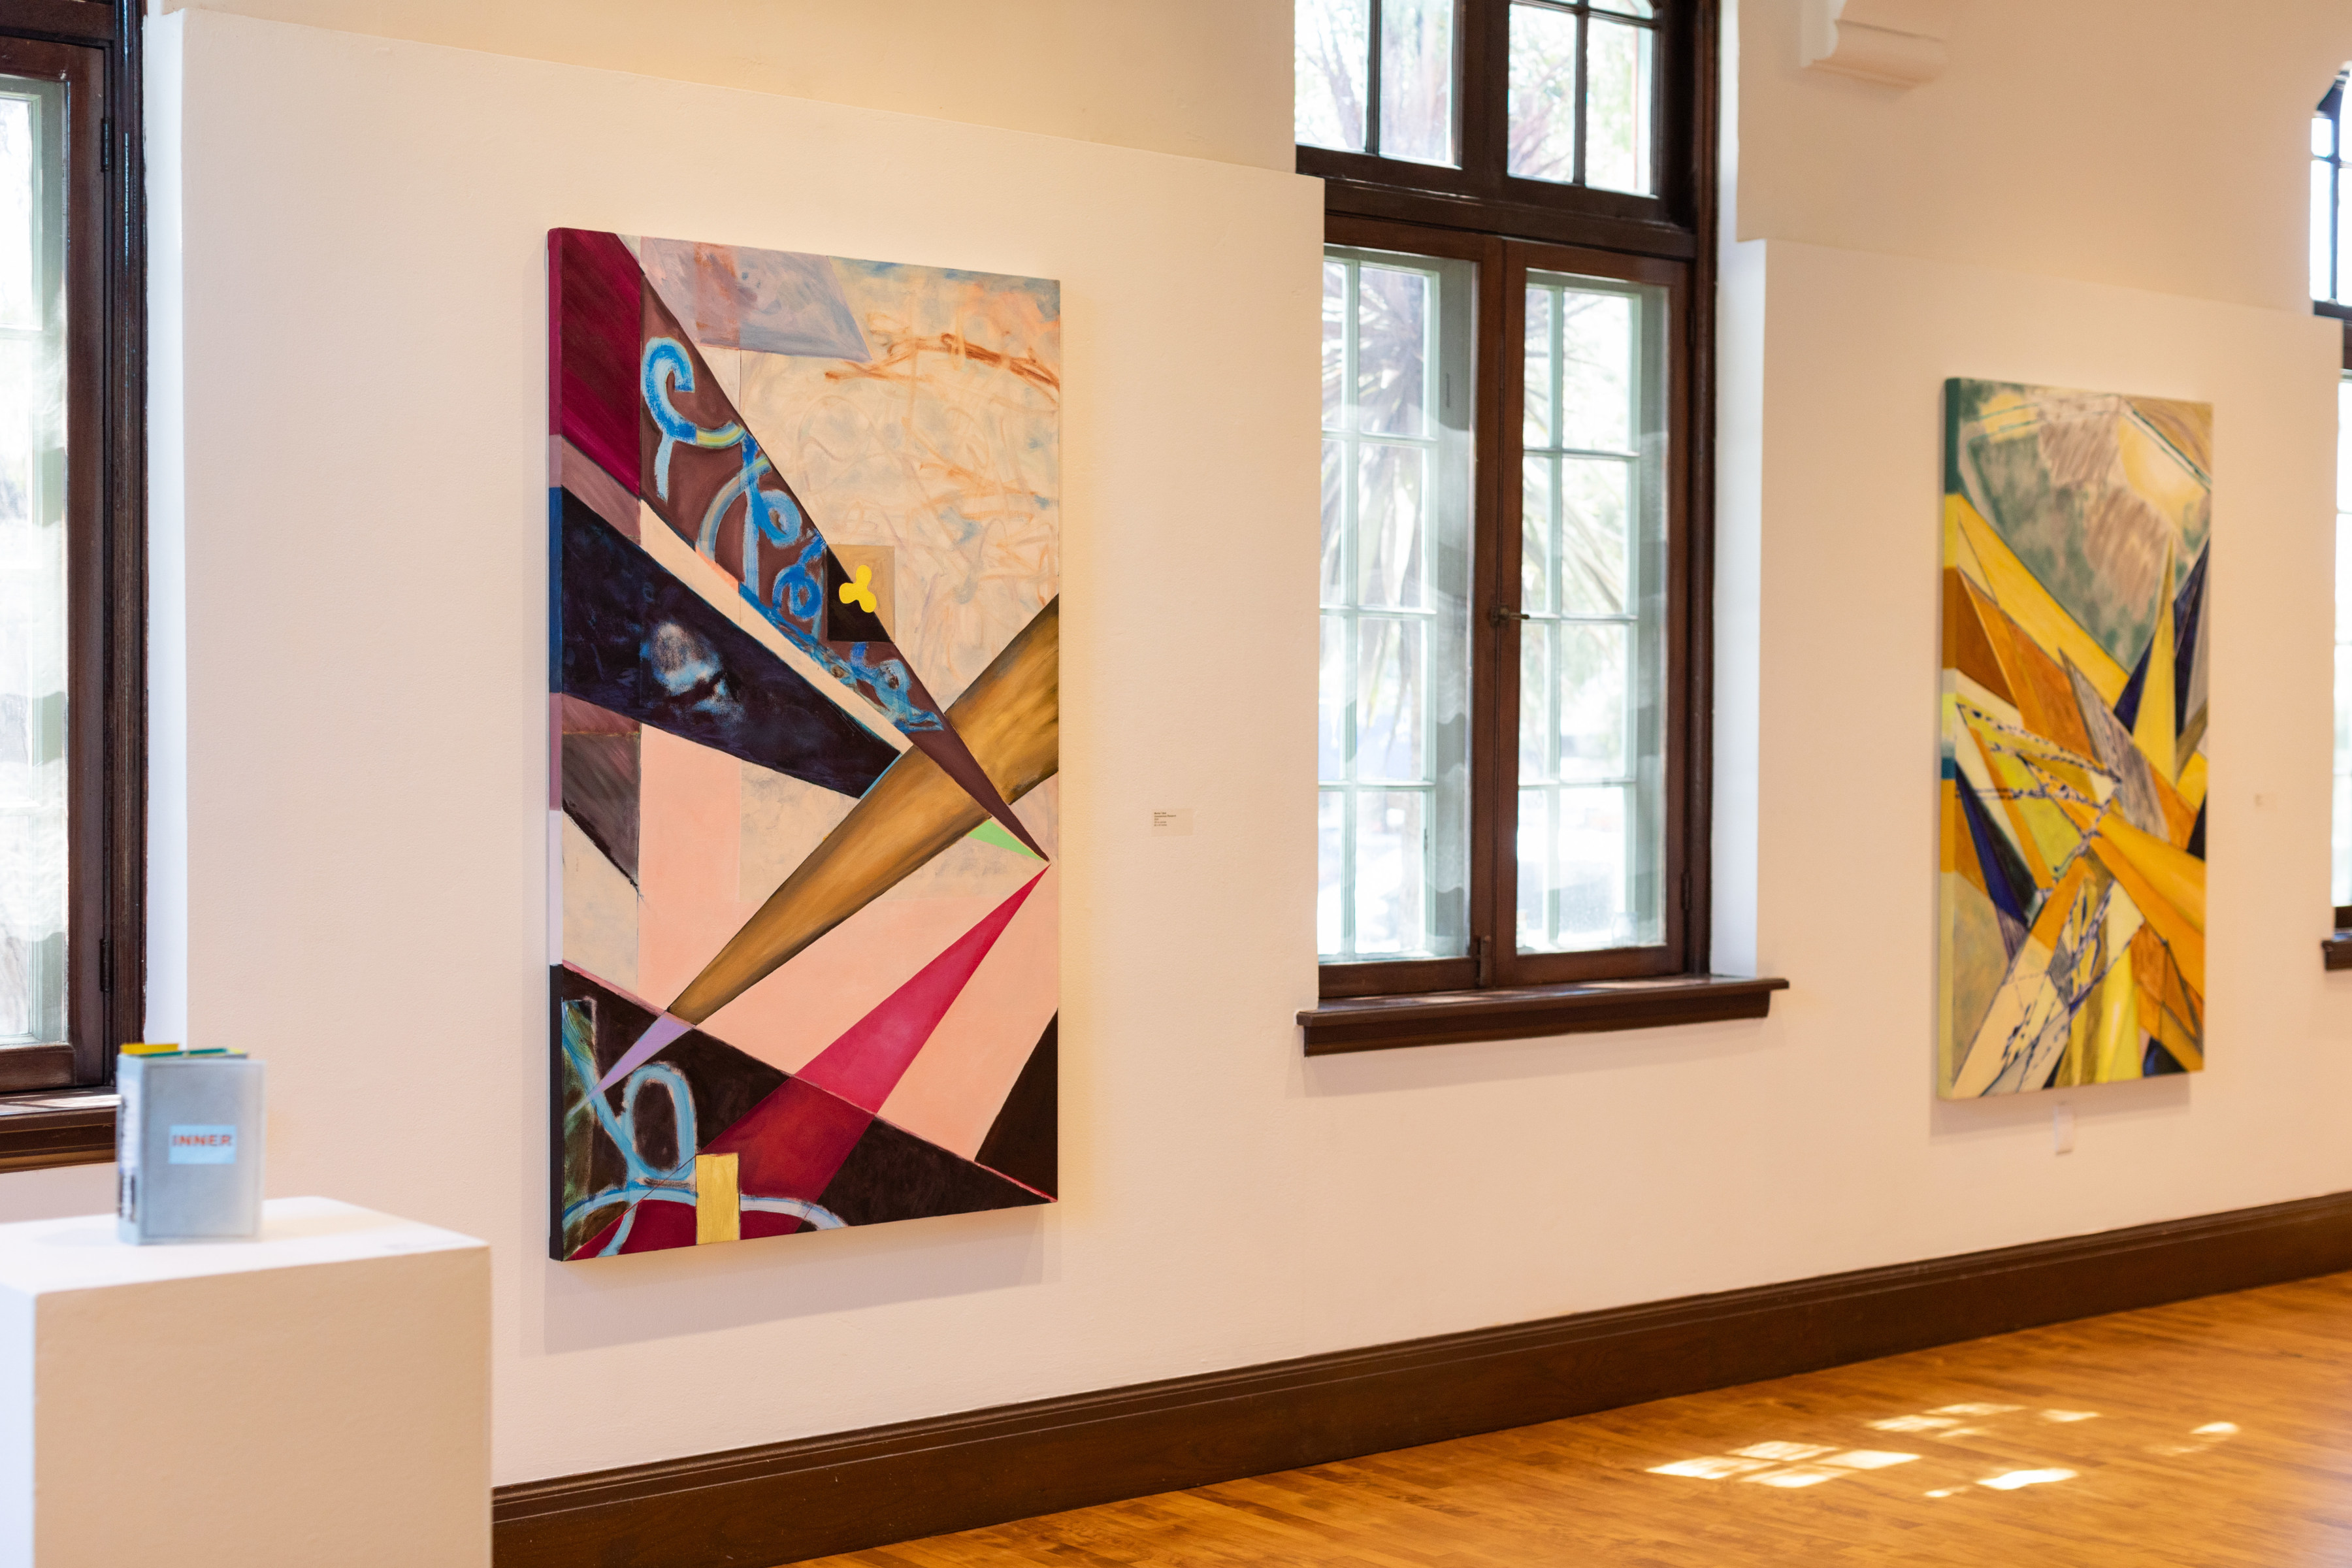 Installation view of Marisa Takal's "Unconscious Research" at the Athenaeum Music and Arts Library